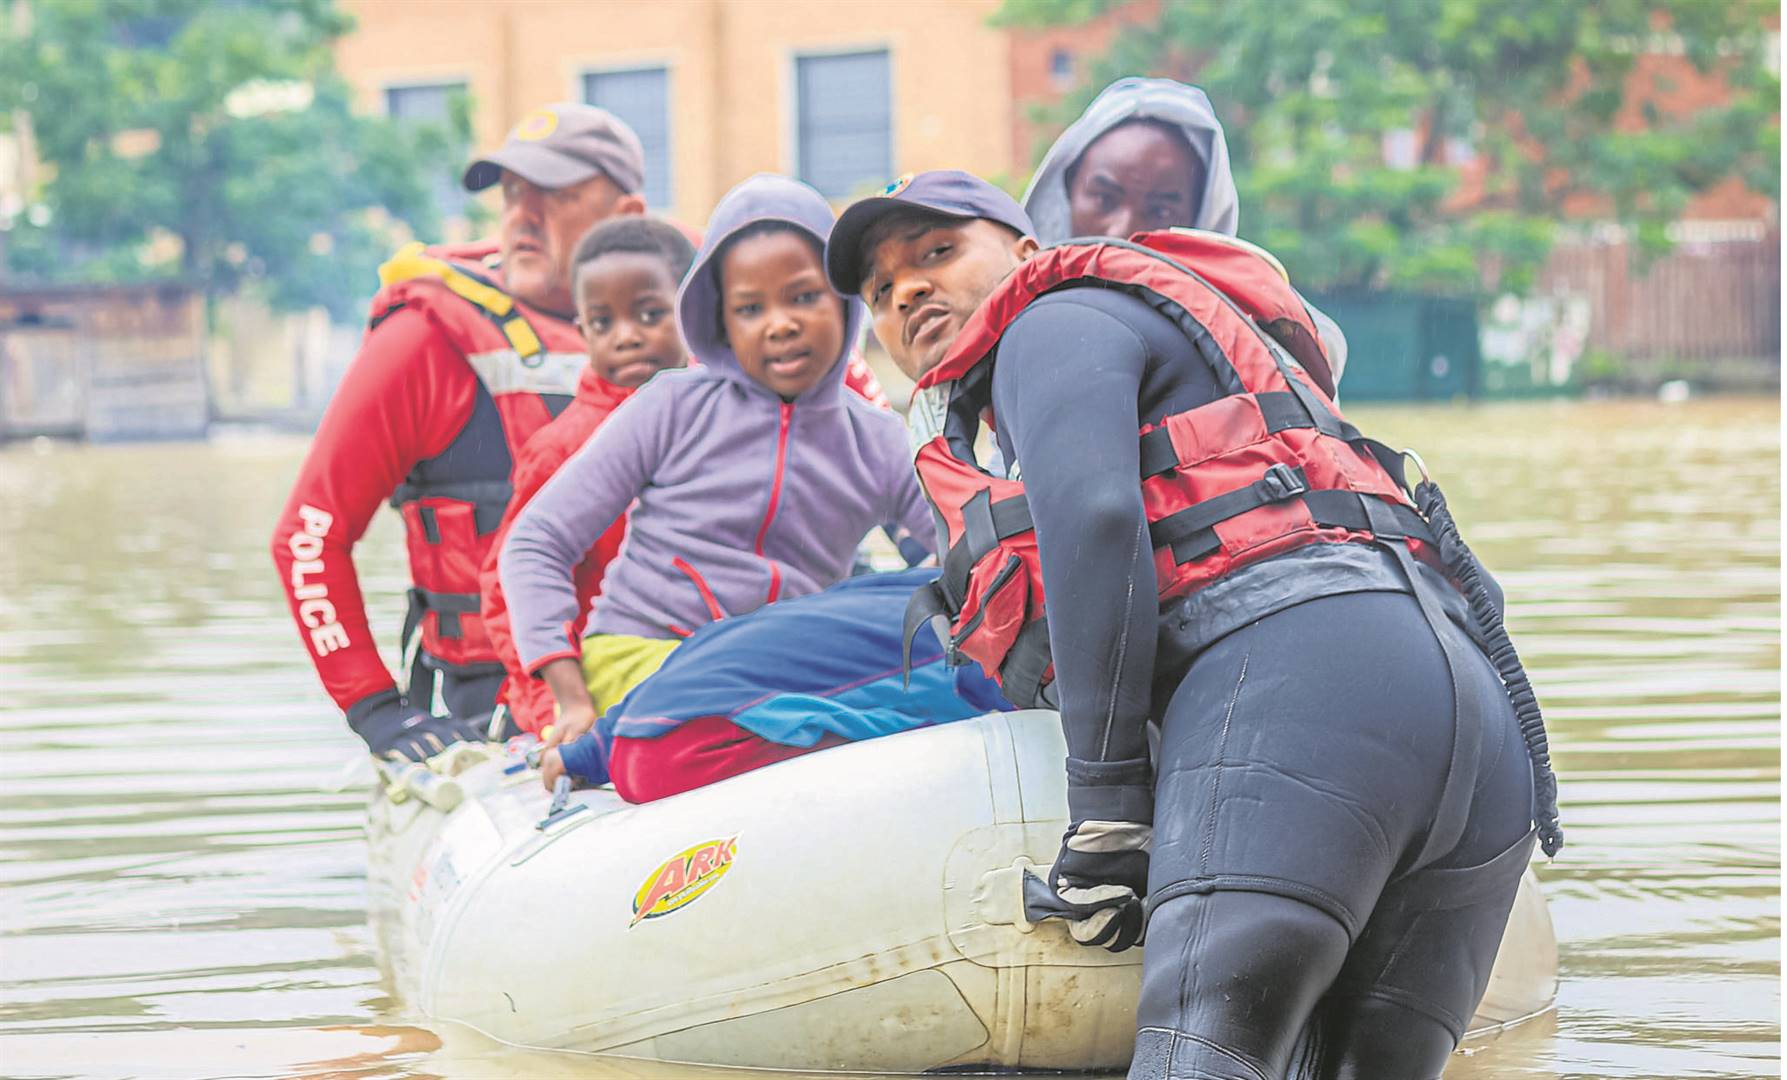 ABOVE: K-9 Search and rescue from Pietermaritzburg and Ladysmith using rubber boats to evacuate people from Alexander and Forbes Street, yesterday morning. The lower parts of Ladysmith were flooded after the Klip River burst its banks on Sunday night. Pictured are Pietermaritzburg Search and Rescue team Sergeant Jesse Mare (front) and Warrant officer Karl Gous escorting children who were stuck in a flat in the Ladysmith CBD. PHOTO: Claudine Senekal (Ladysmith Herald)